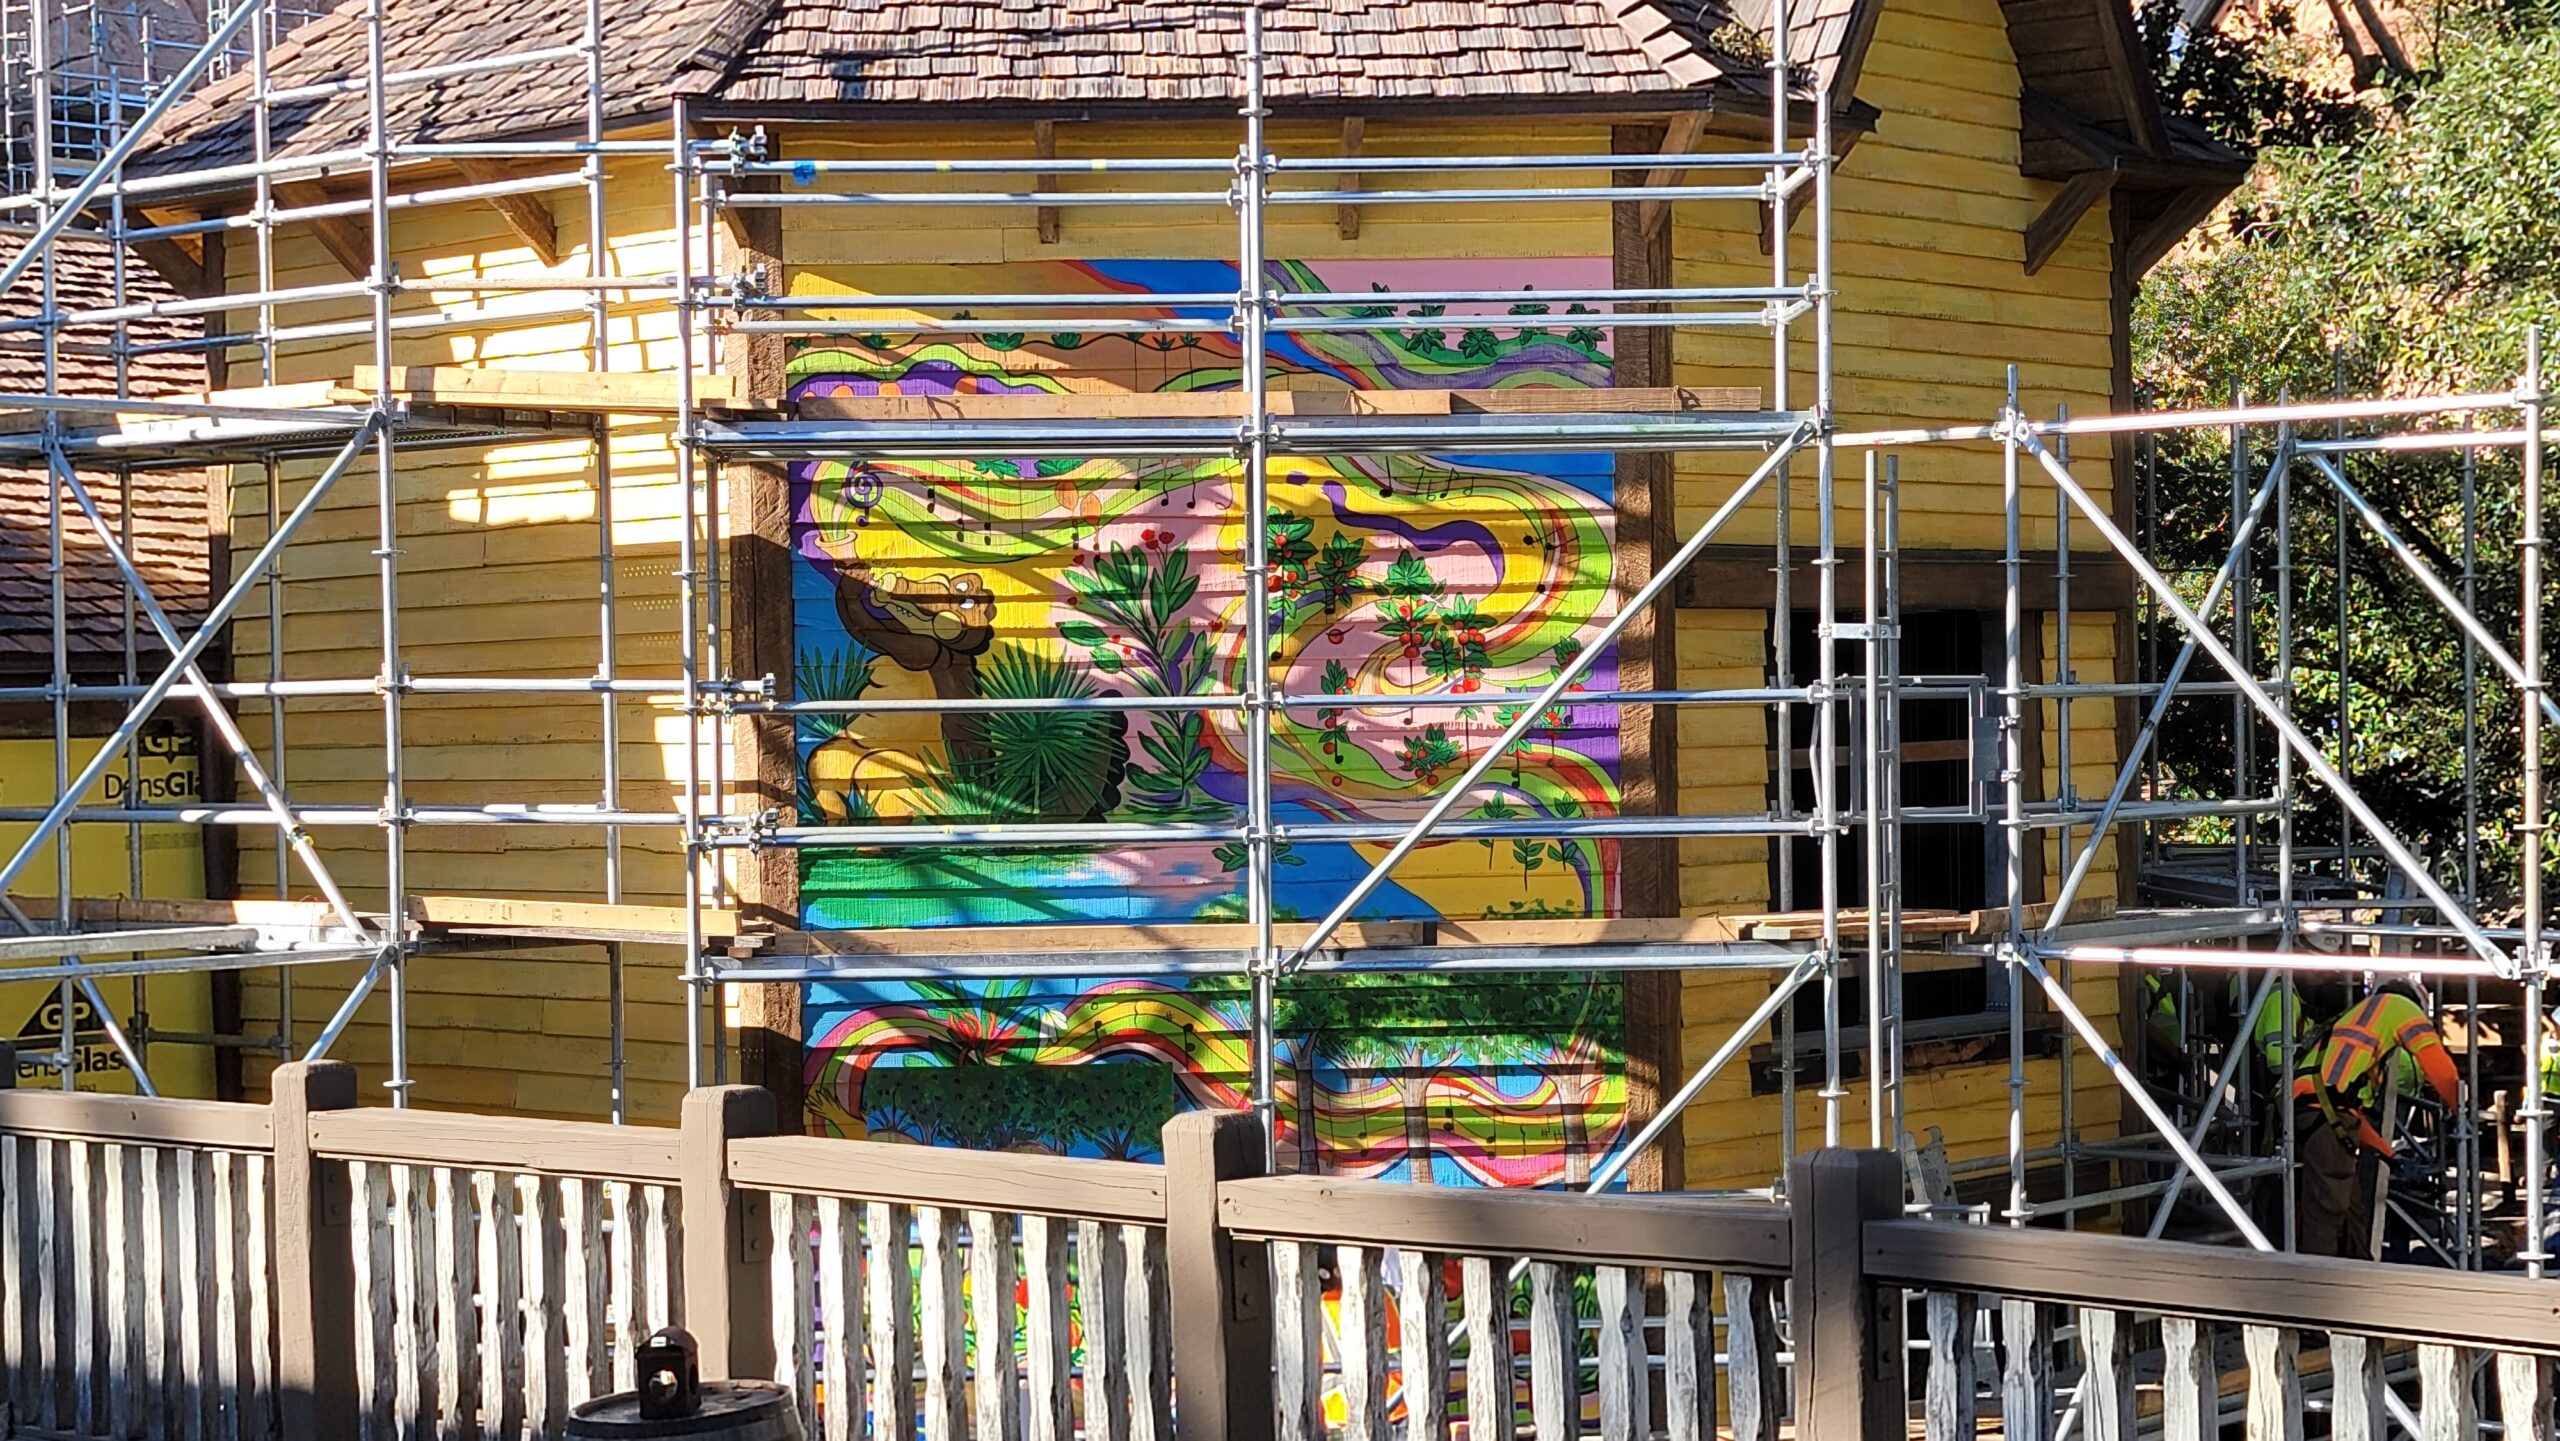 The New Tiana's Bayou Adventure Barn Mural is Almost Complete